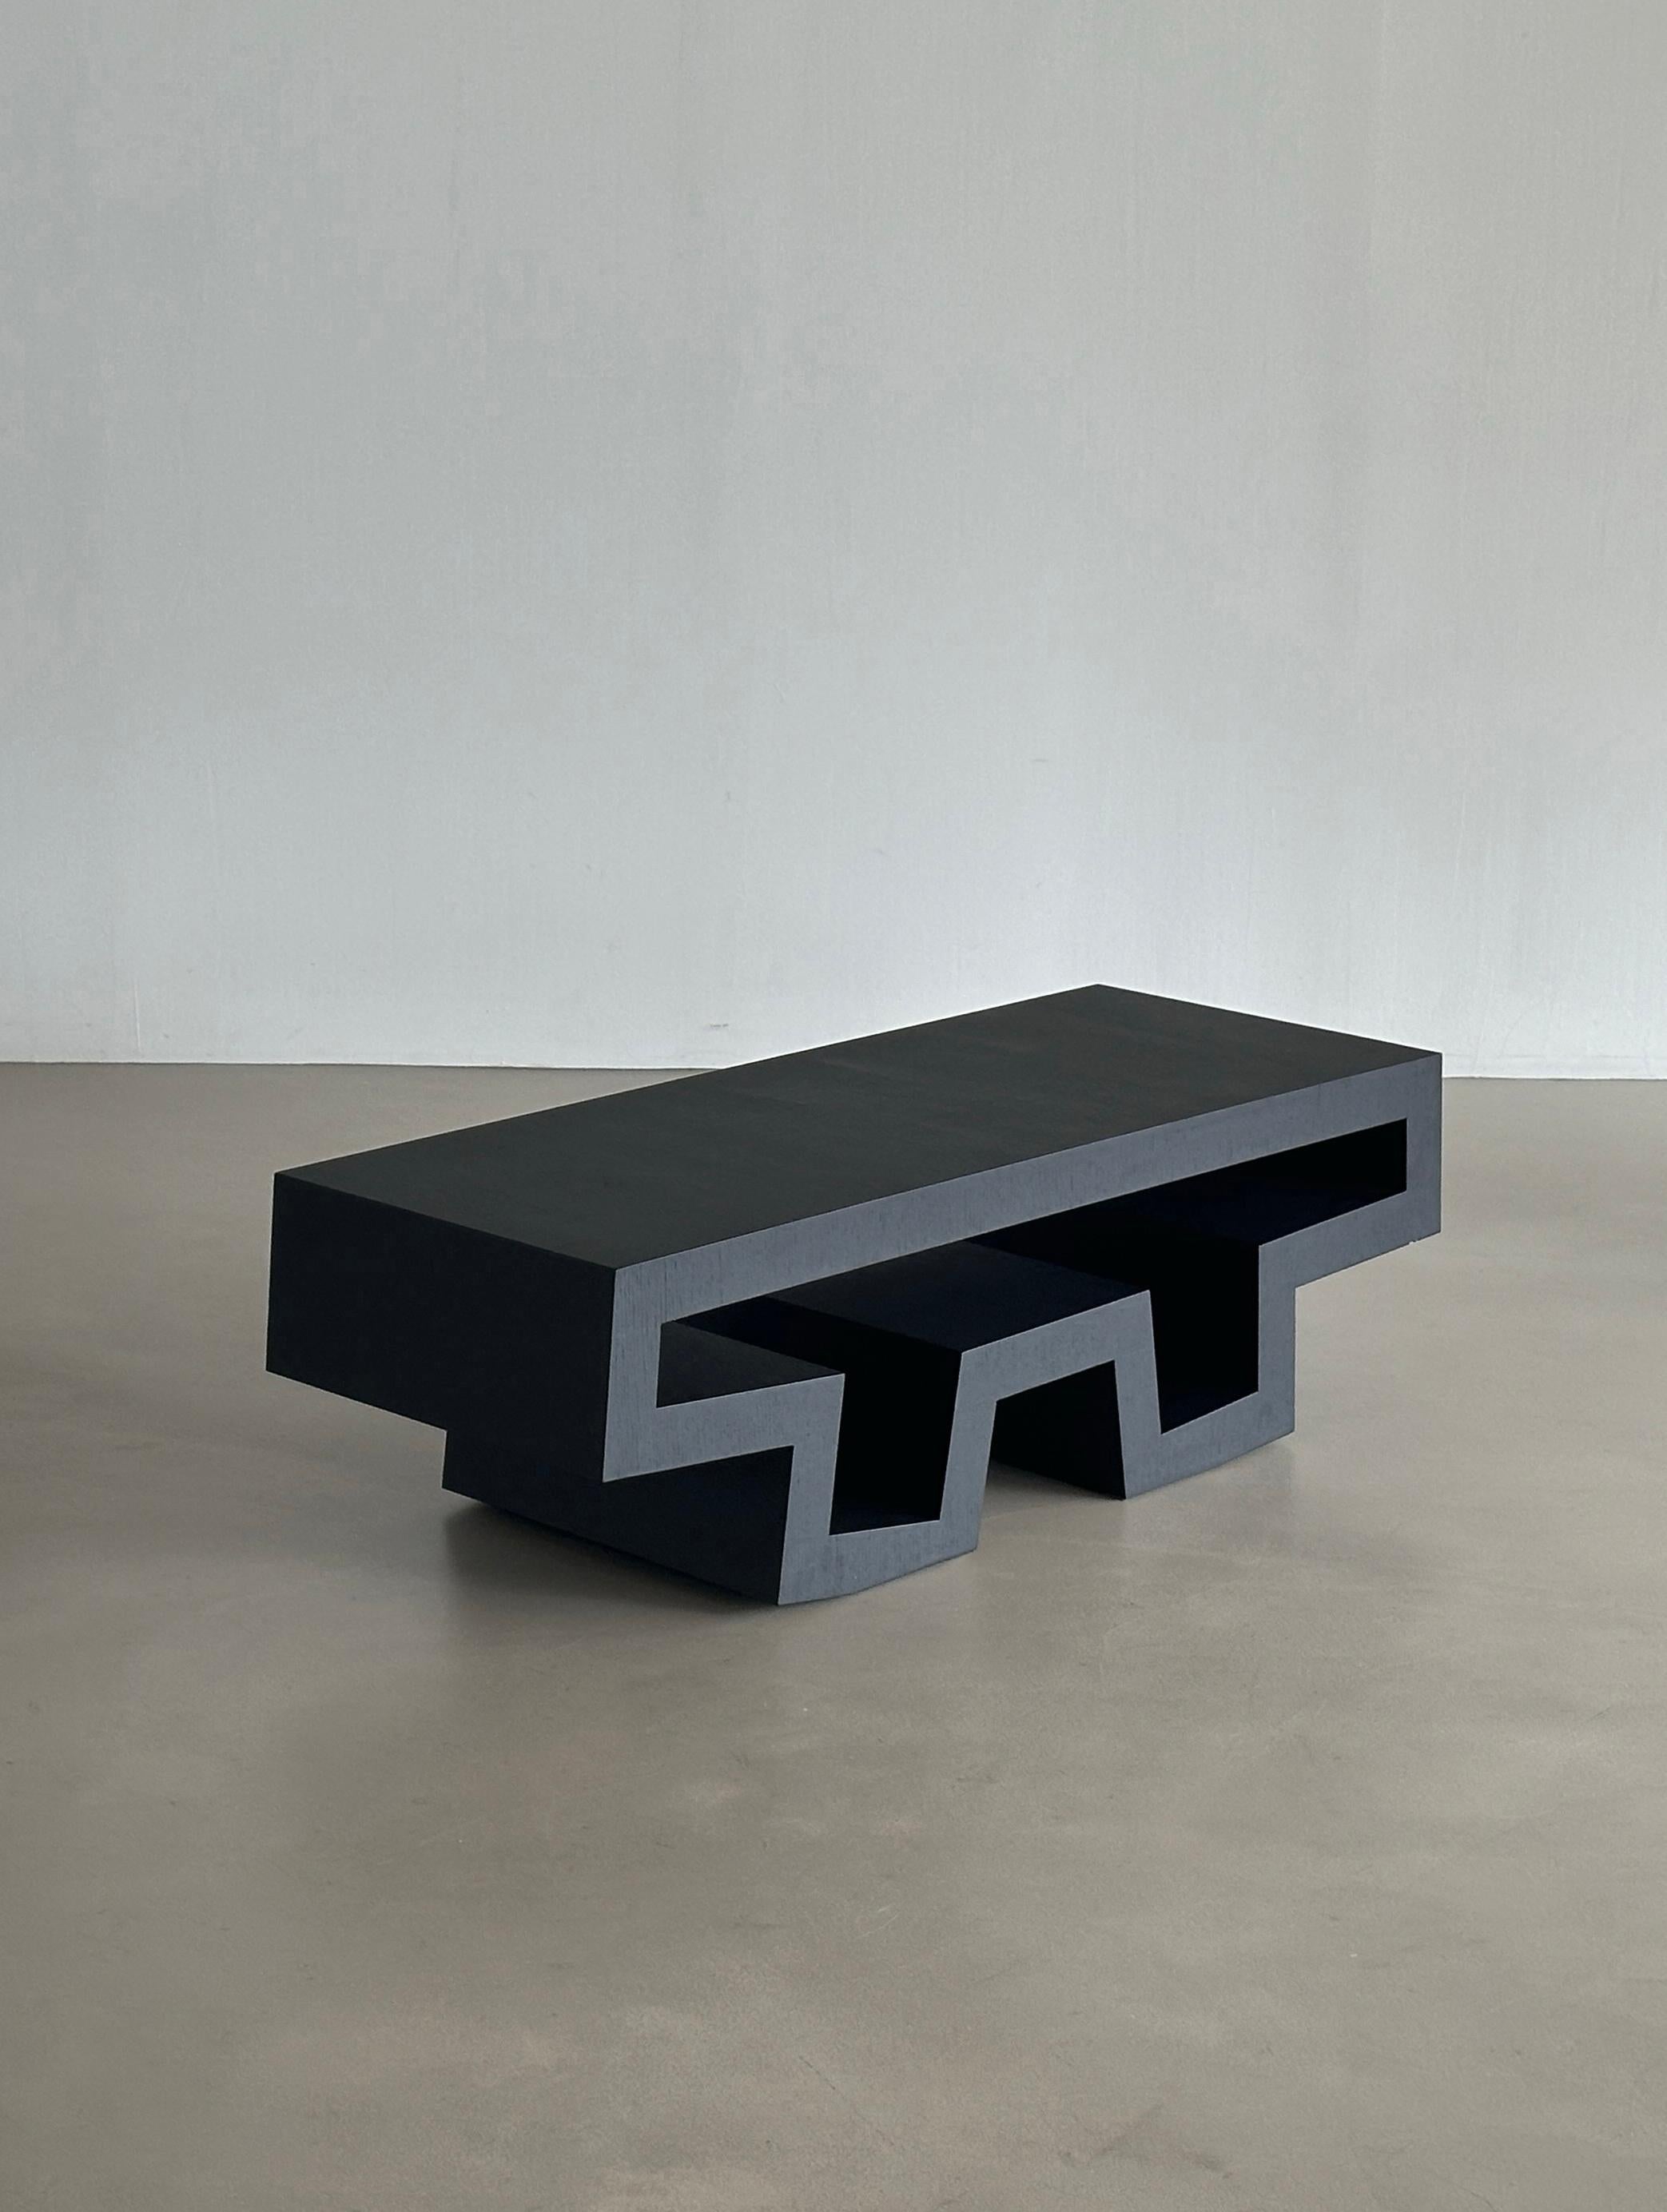 Graffiti Project Low Table by Wonwoo Koo
Dimensions: D 60 x W 130 x H 40 cm.
Materials: Oak wood veneer.

Different color options are available: black, beige, white gray, blue or orange. Please contact us.

Wonwoo Koo
I majored in furniture design